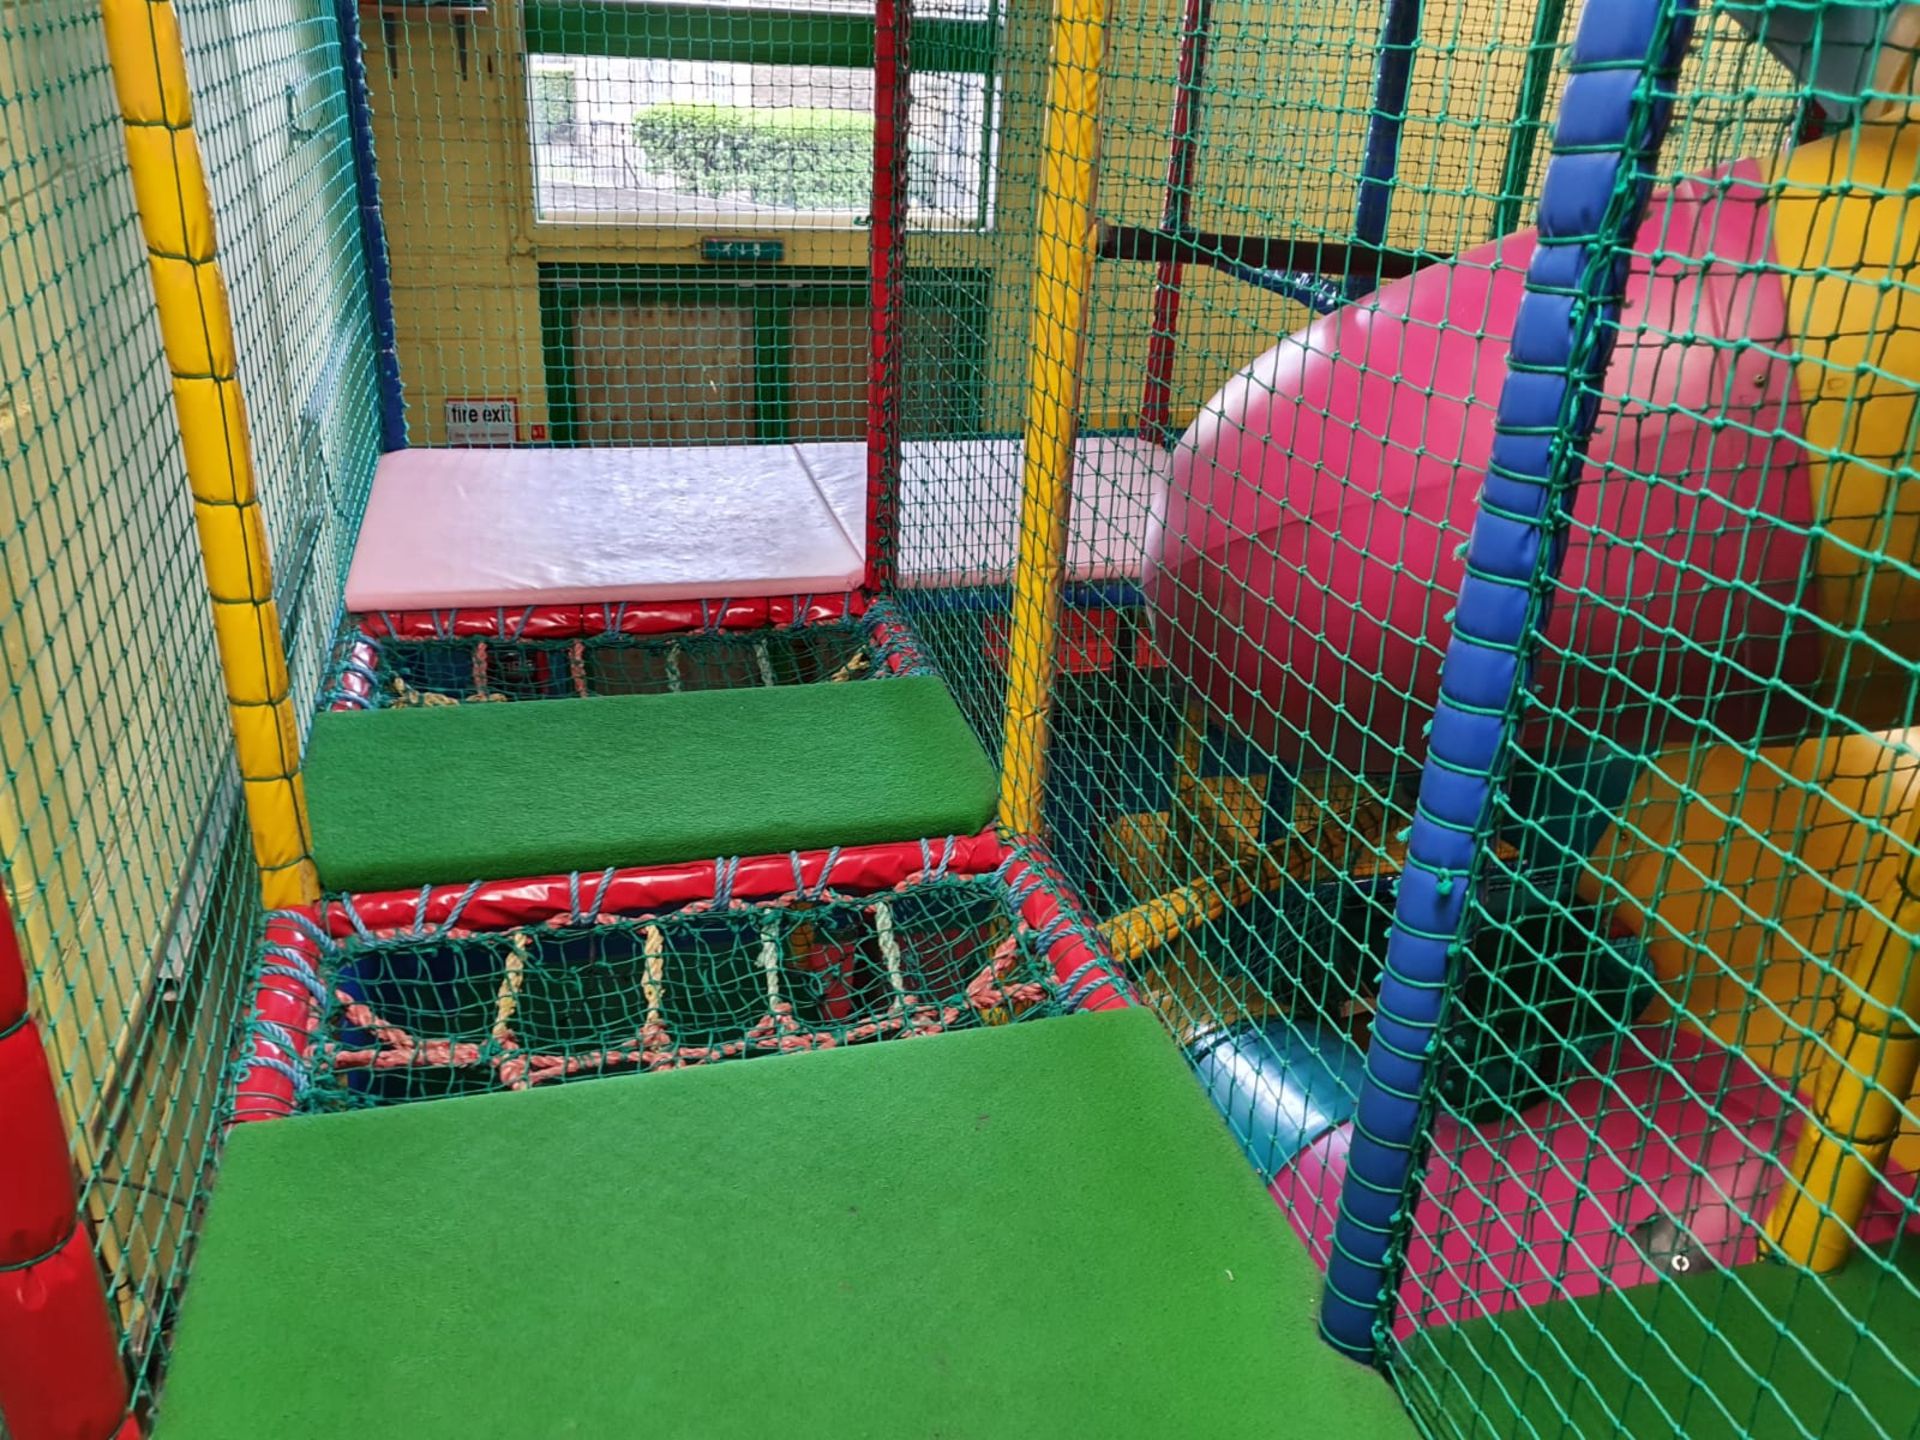 Bramleys Big Adventure Playground - Giant Action-Packed Playcentre With Slides, Zip Line Swings, - Image 113 of 128